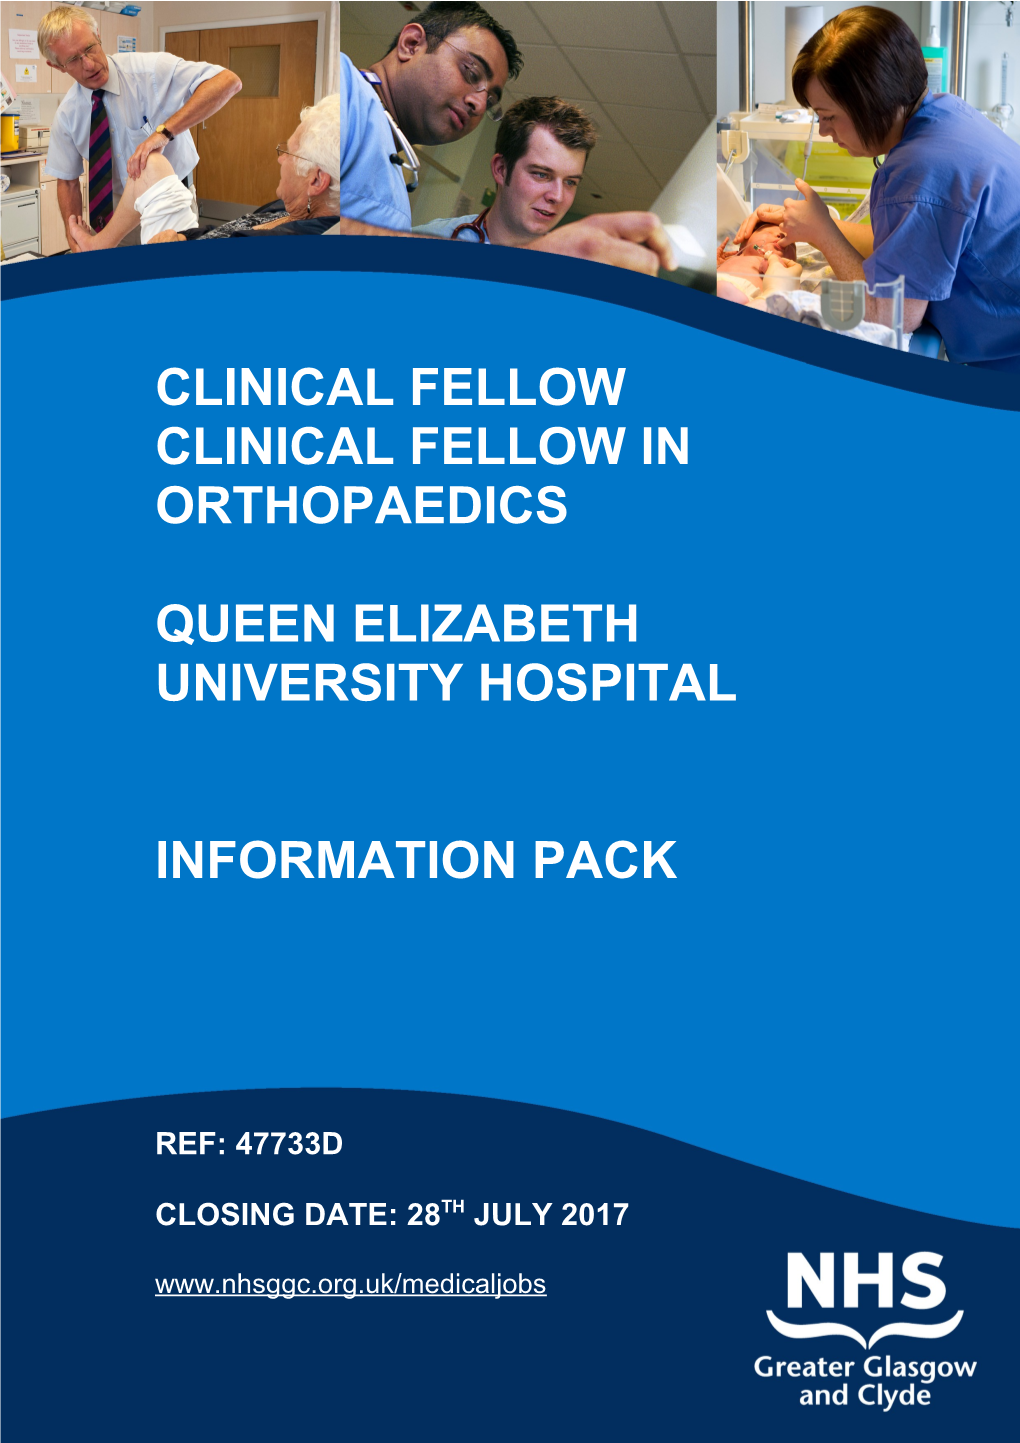 Clinical Fellow CLINICAL FELLOW in Orthopaedics